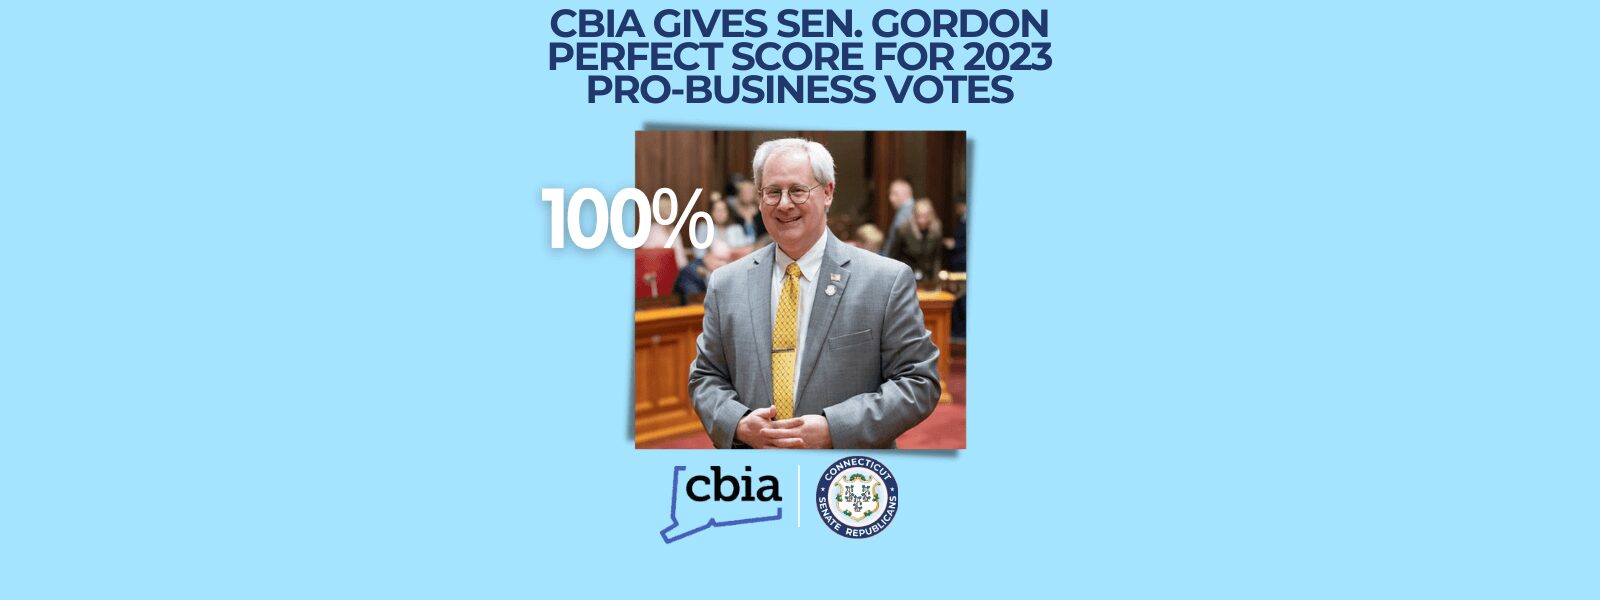 Sen. Gordon Recognized as Perfect Advocate for CT's Business Community